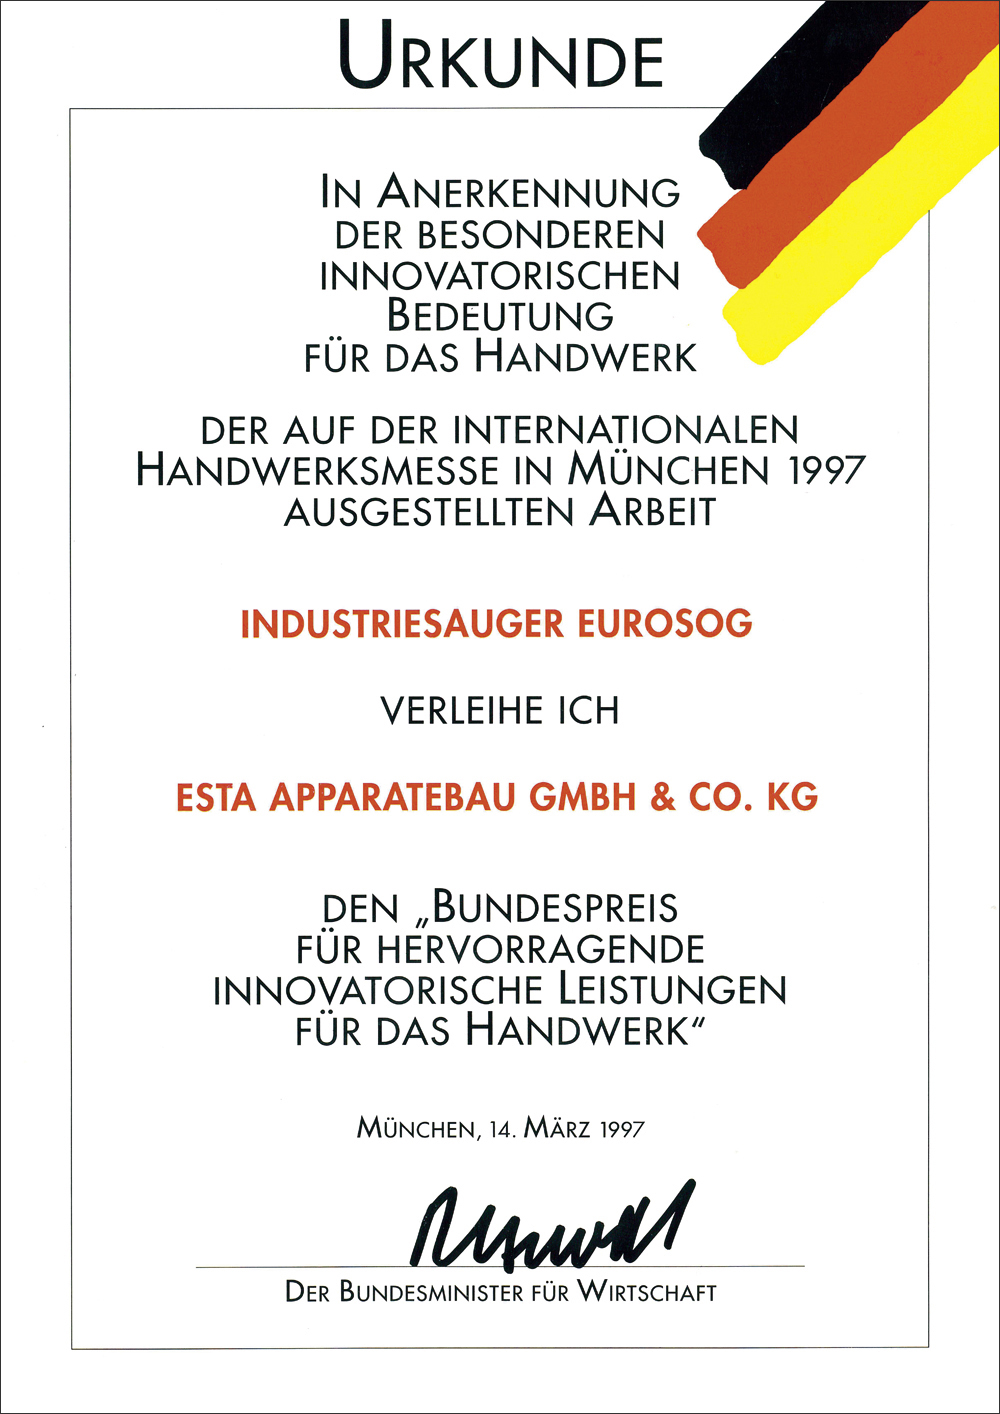 Certificate for the industrial vacuum cleaner EUROSUG.